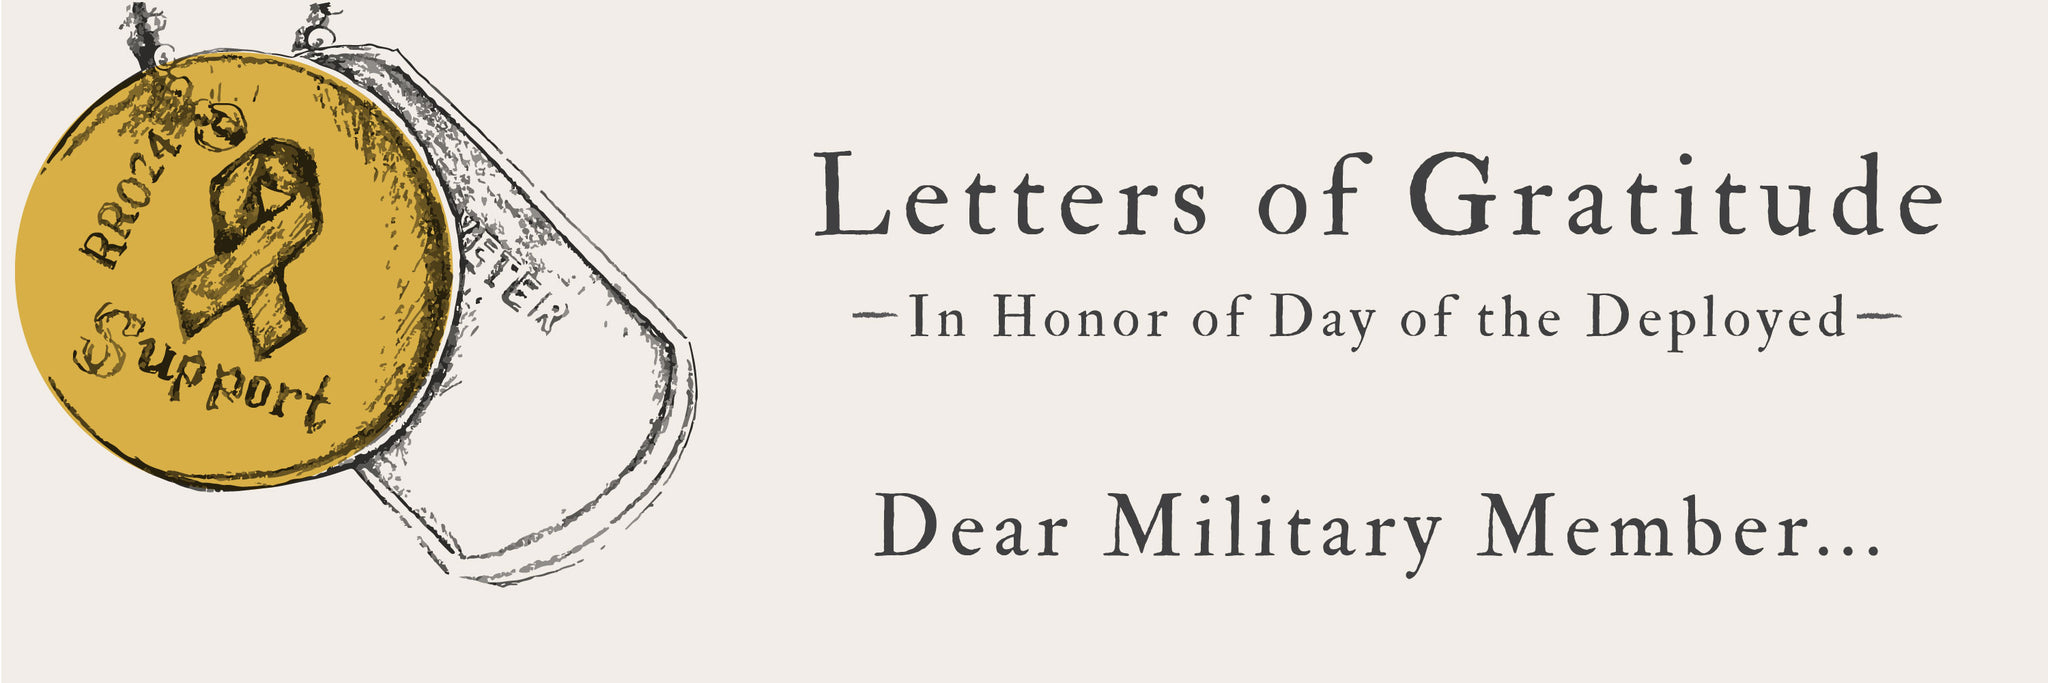 Letters of Gratitude: Letters to Military Members – R. Riveter